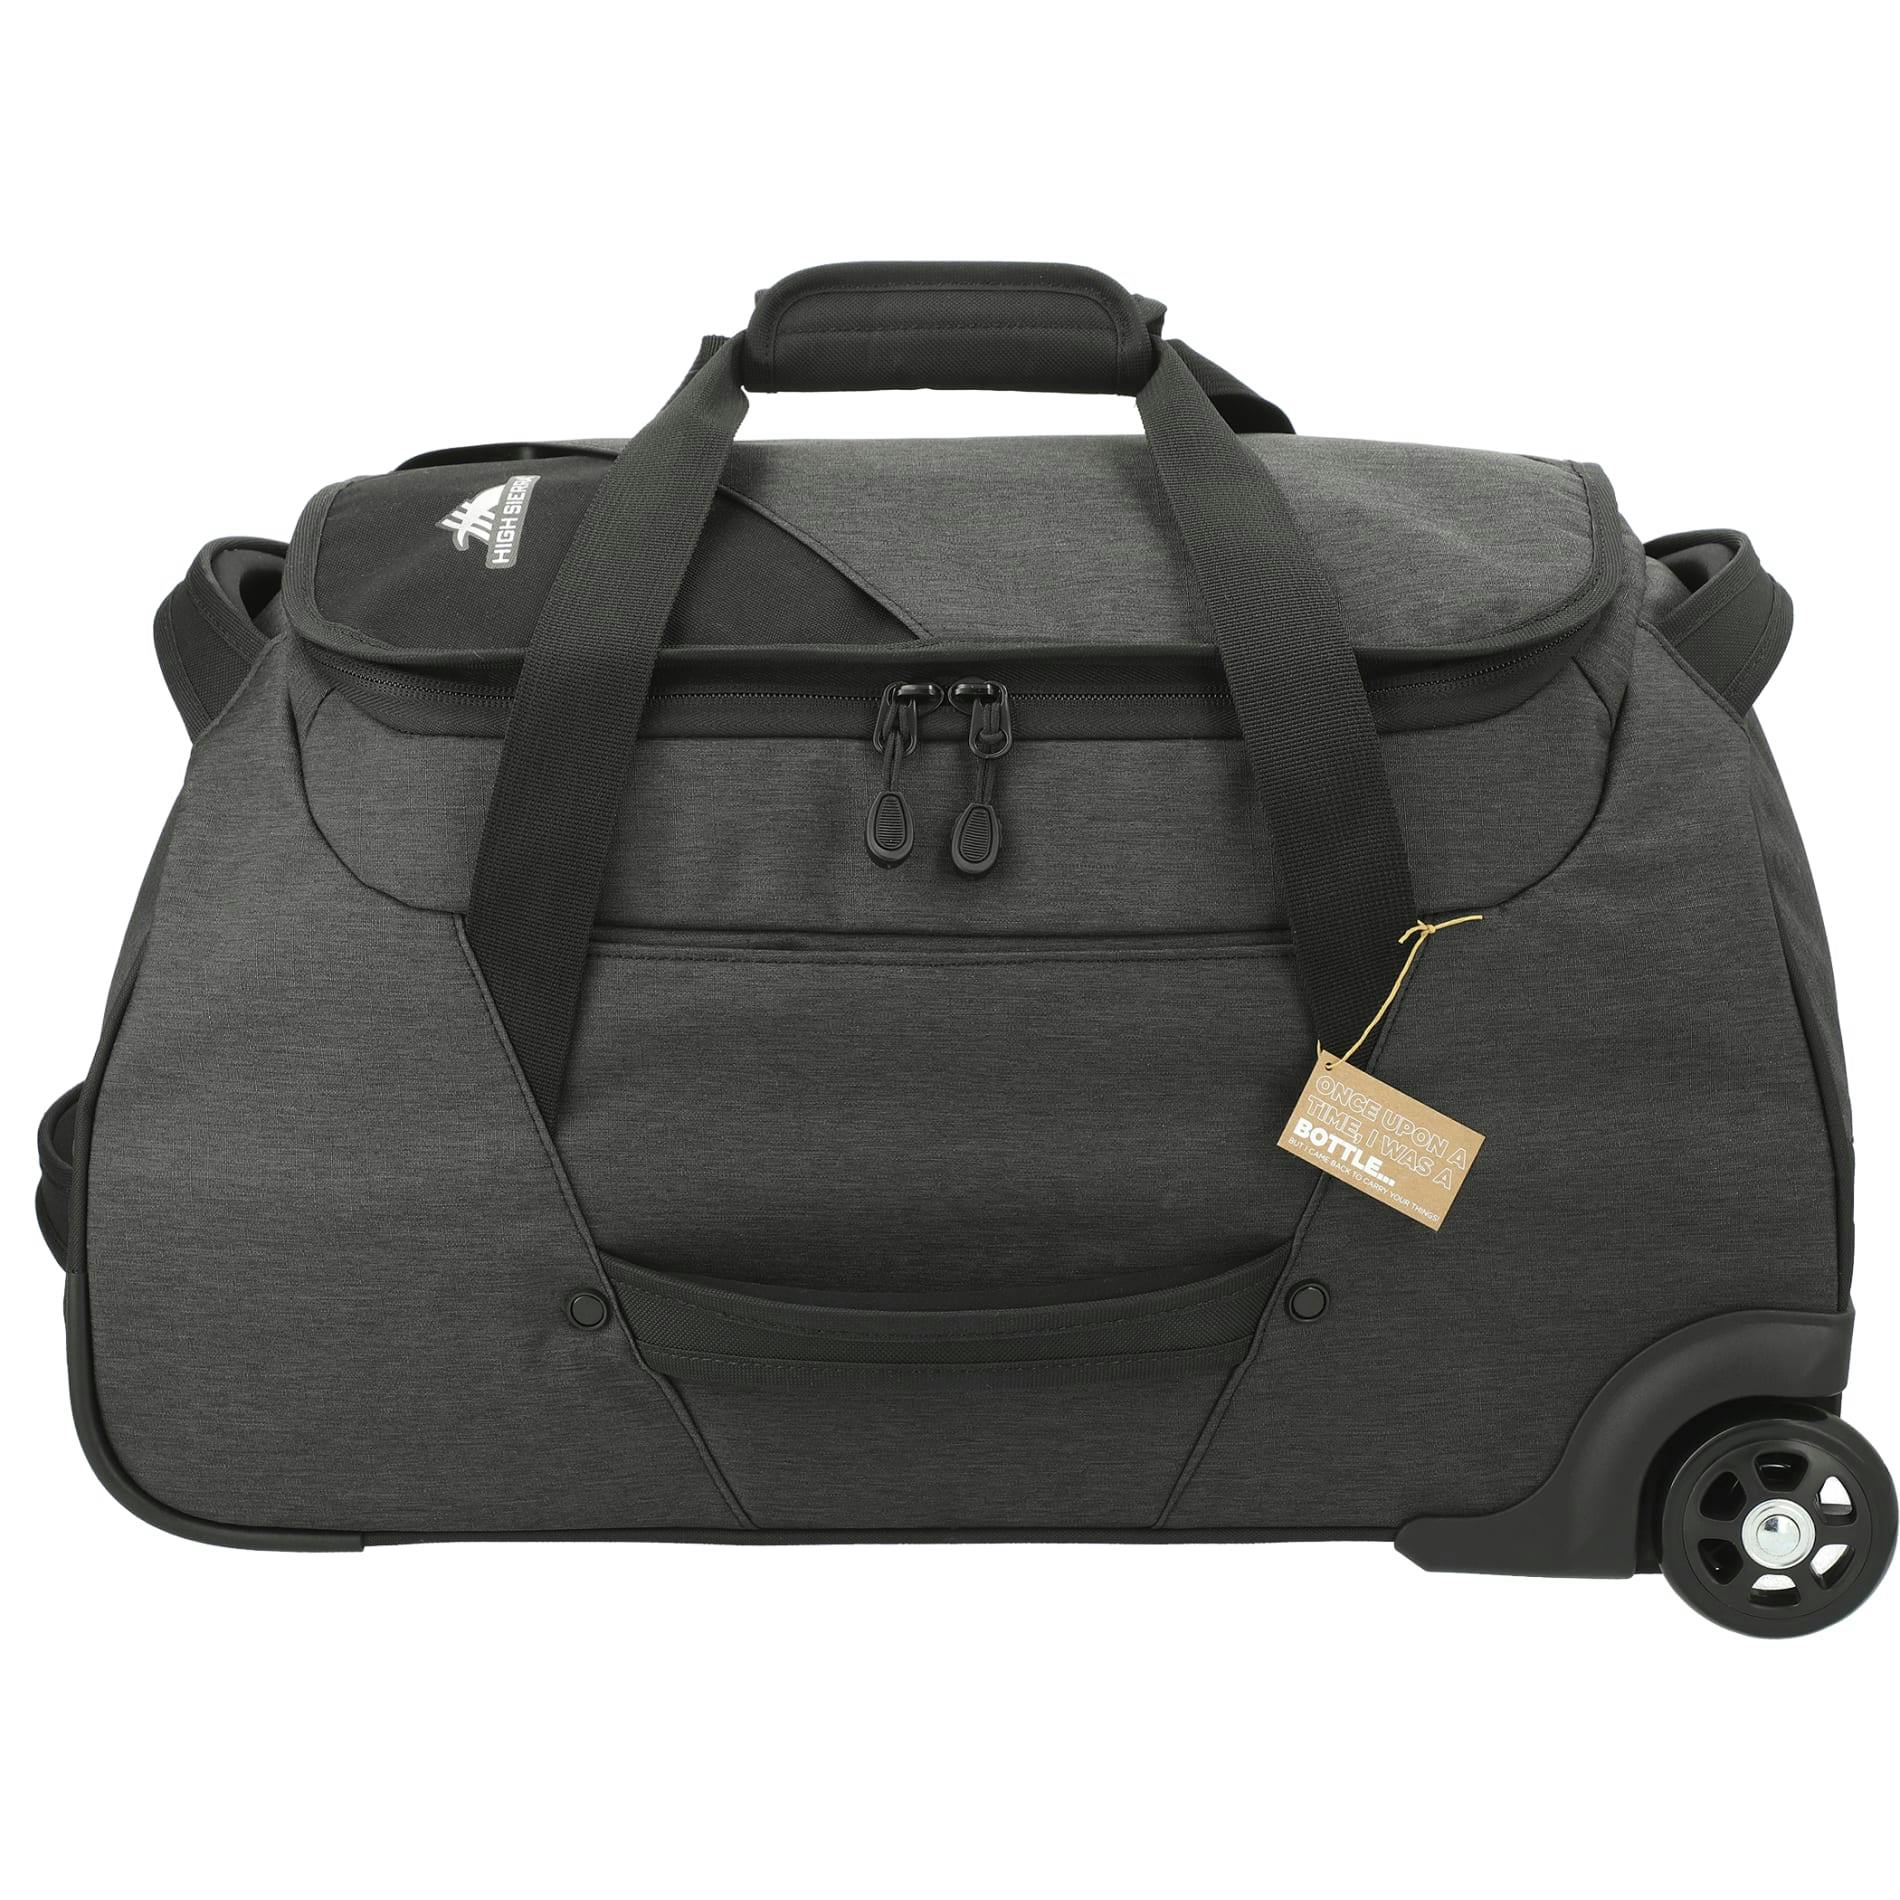 High Sierra Forester RPET 22" Wheeled Duffel - additional Image 1